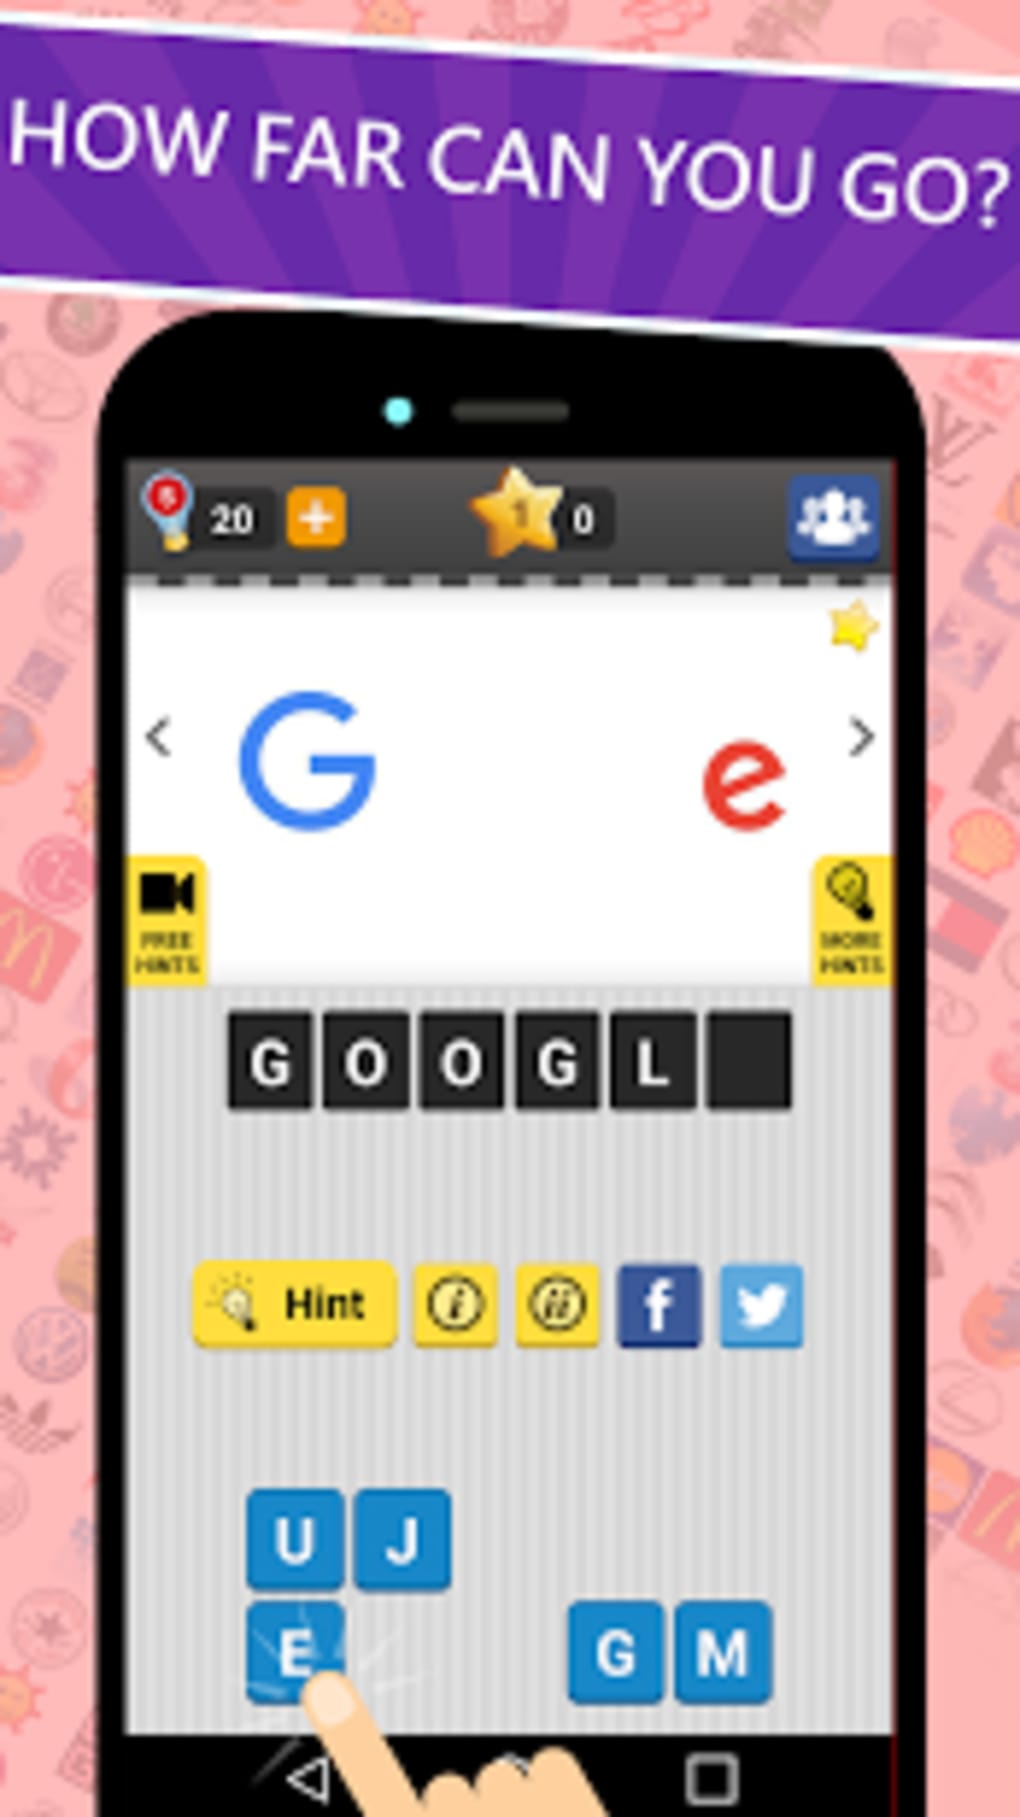 Logo Quiz - Guess the brands! - Apps on Google Play